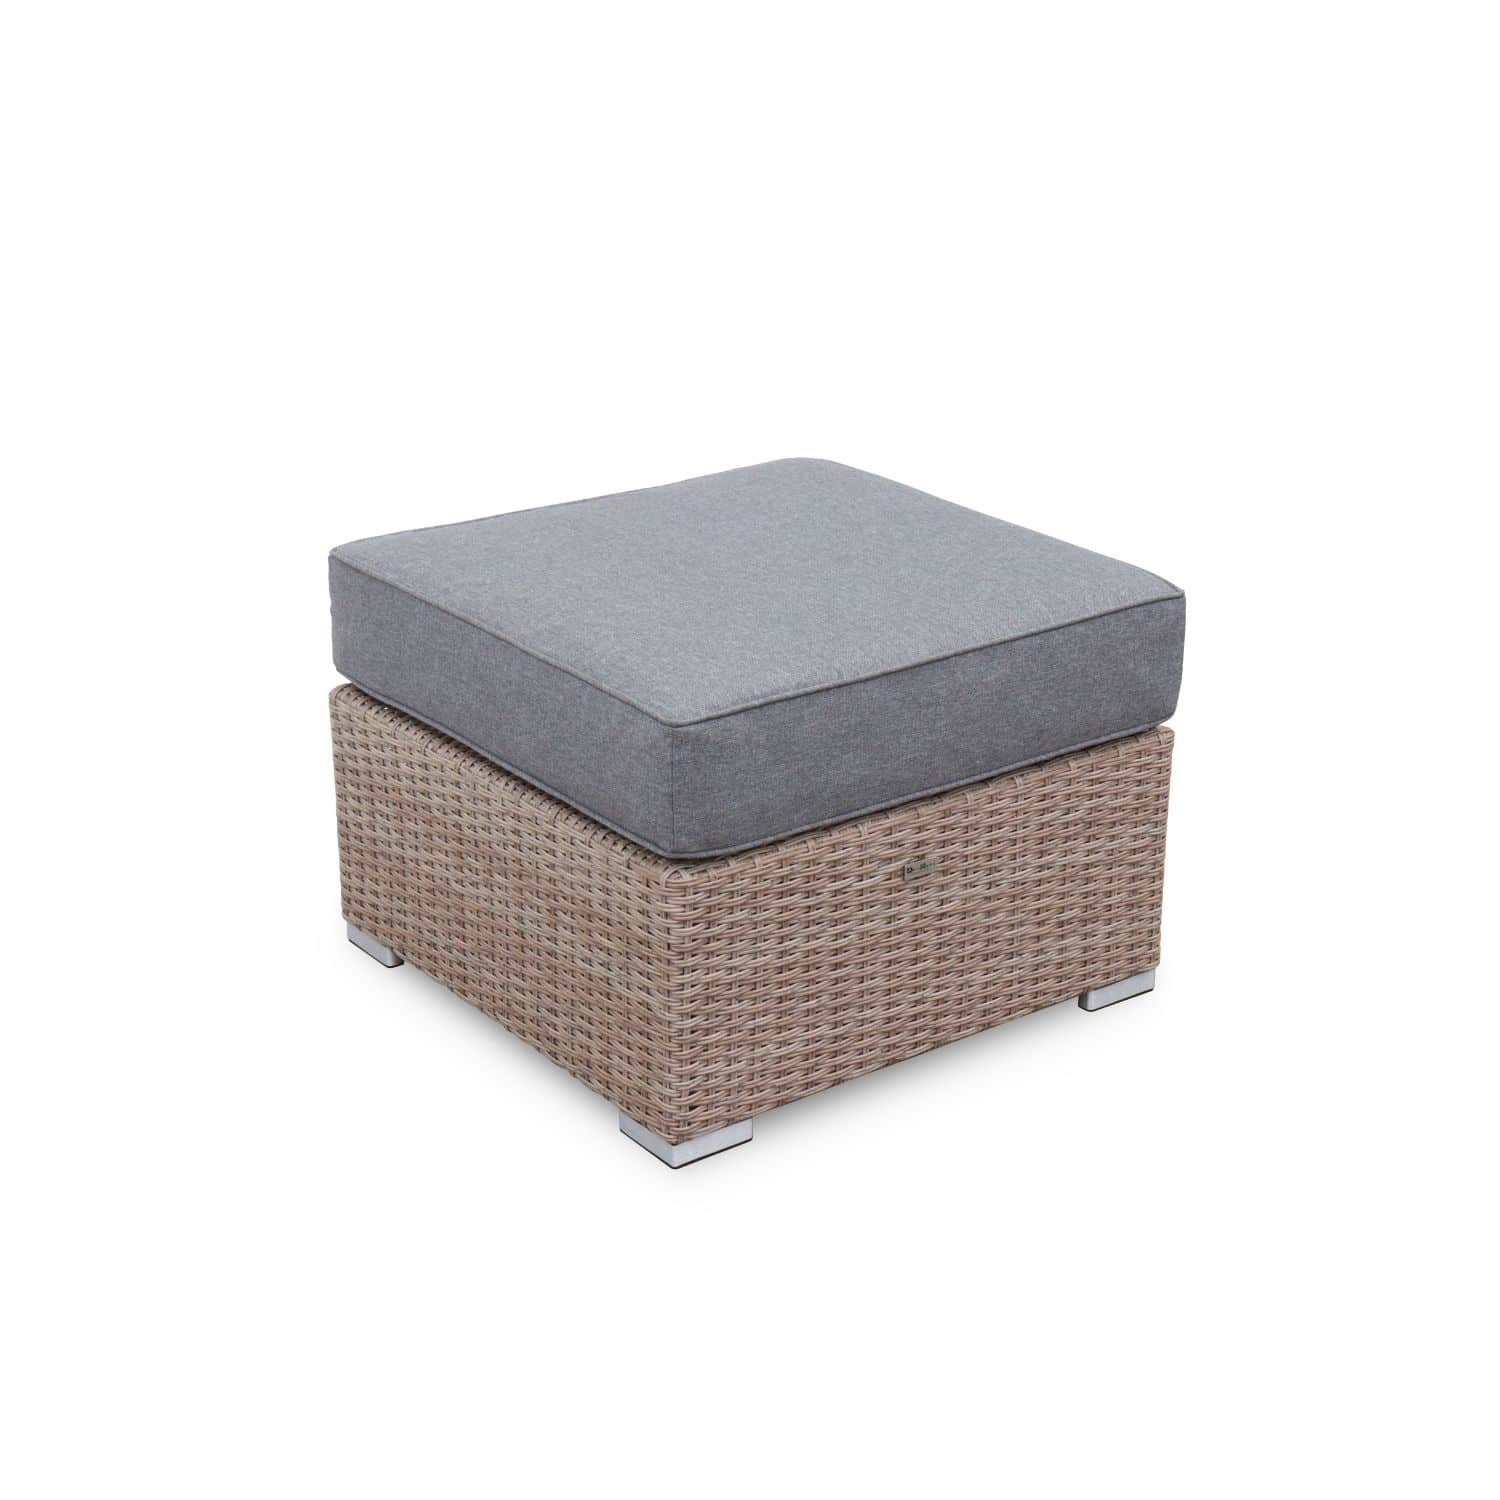 Footstool outdoor lounge natural wicker / grey cushion